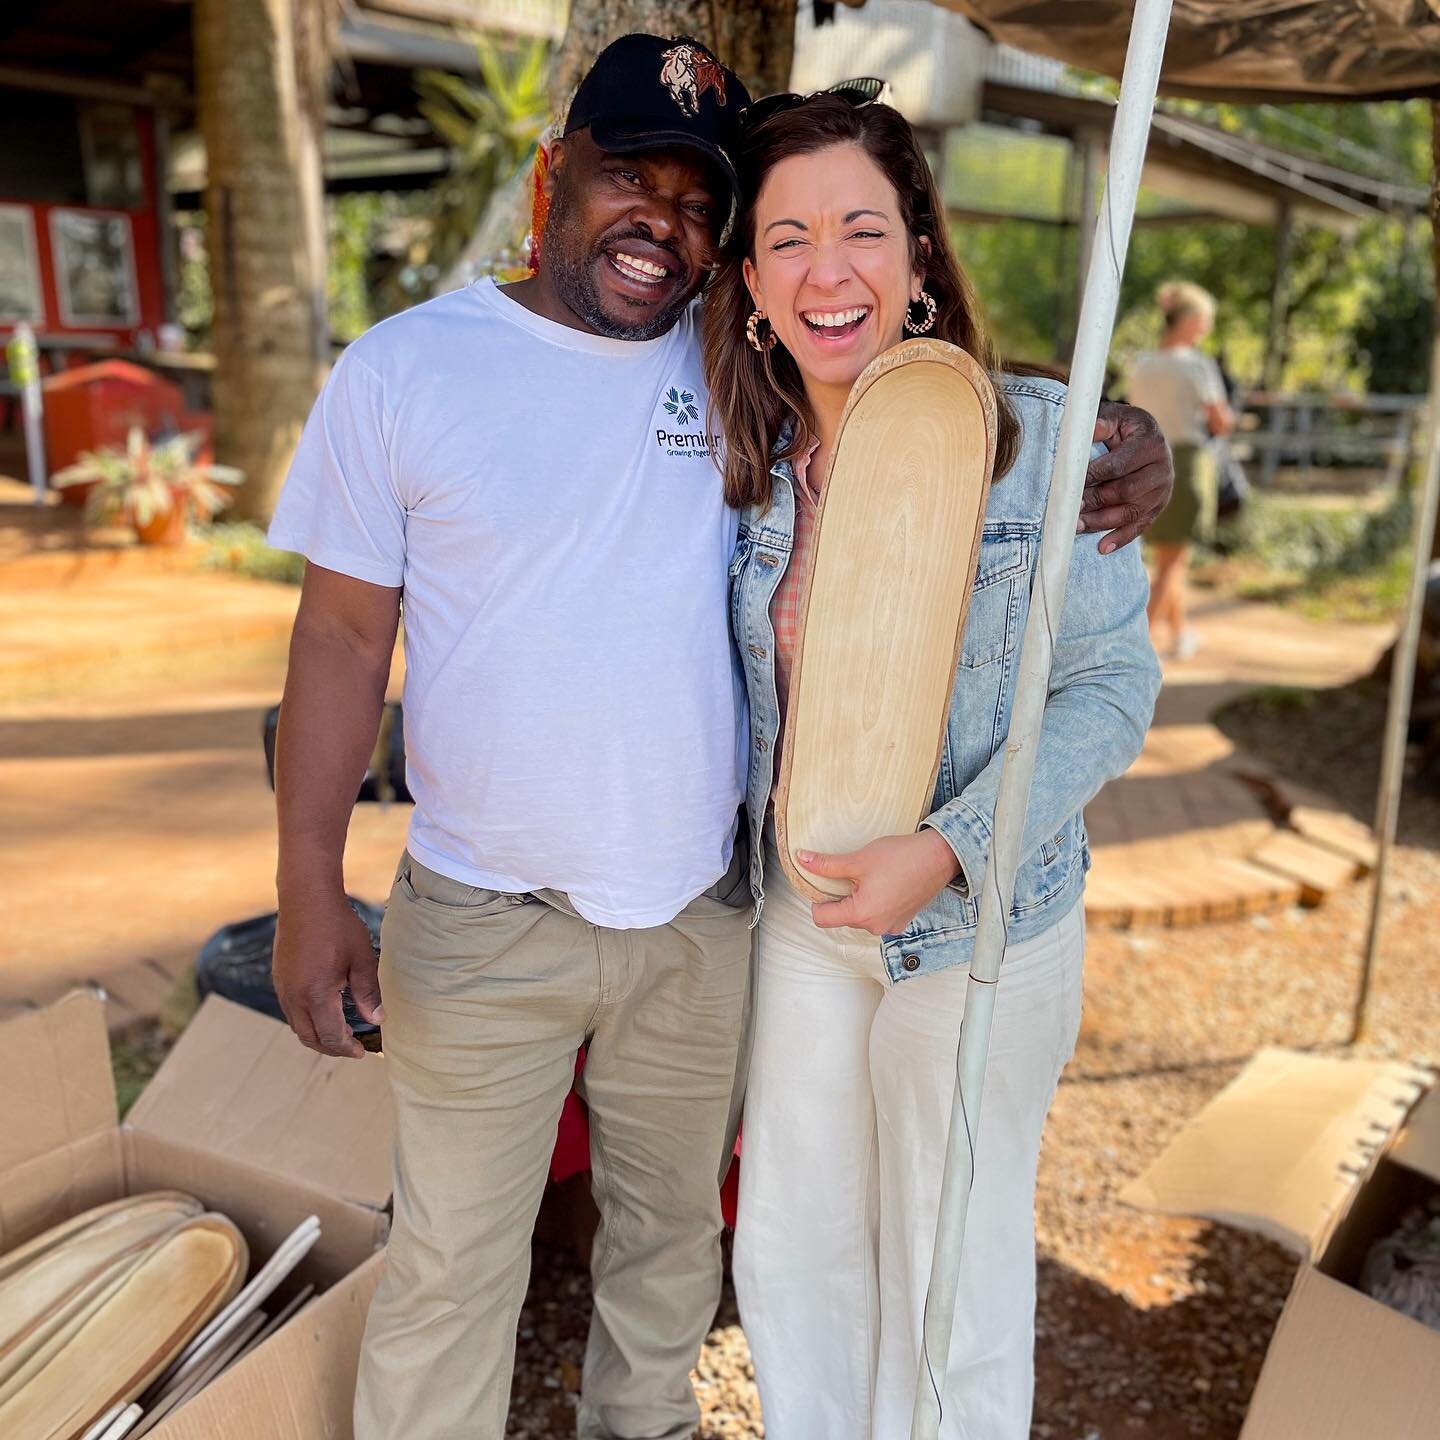 Stopped by to grab some more goodies from Saziso Dlamini today. He is the craftsman making all of the beautiful decor pieces I&rsquo;m bringing to share with you next month! 
.
Now let&rsquo;s see how heavy these pack into our luggage to bring back t